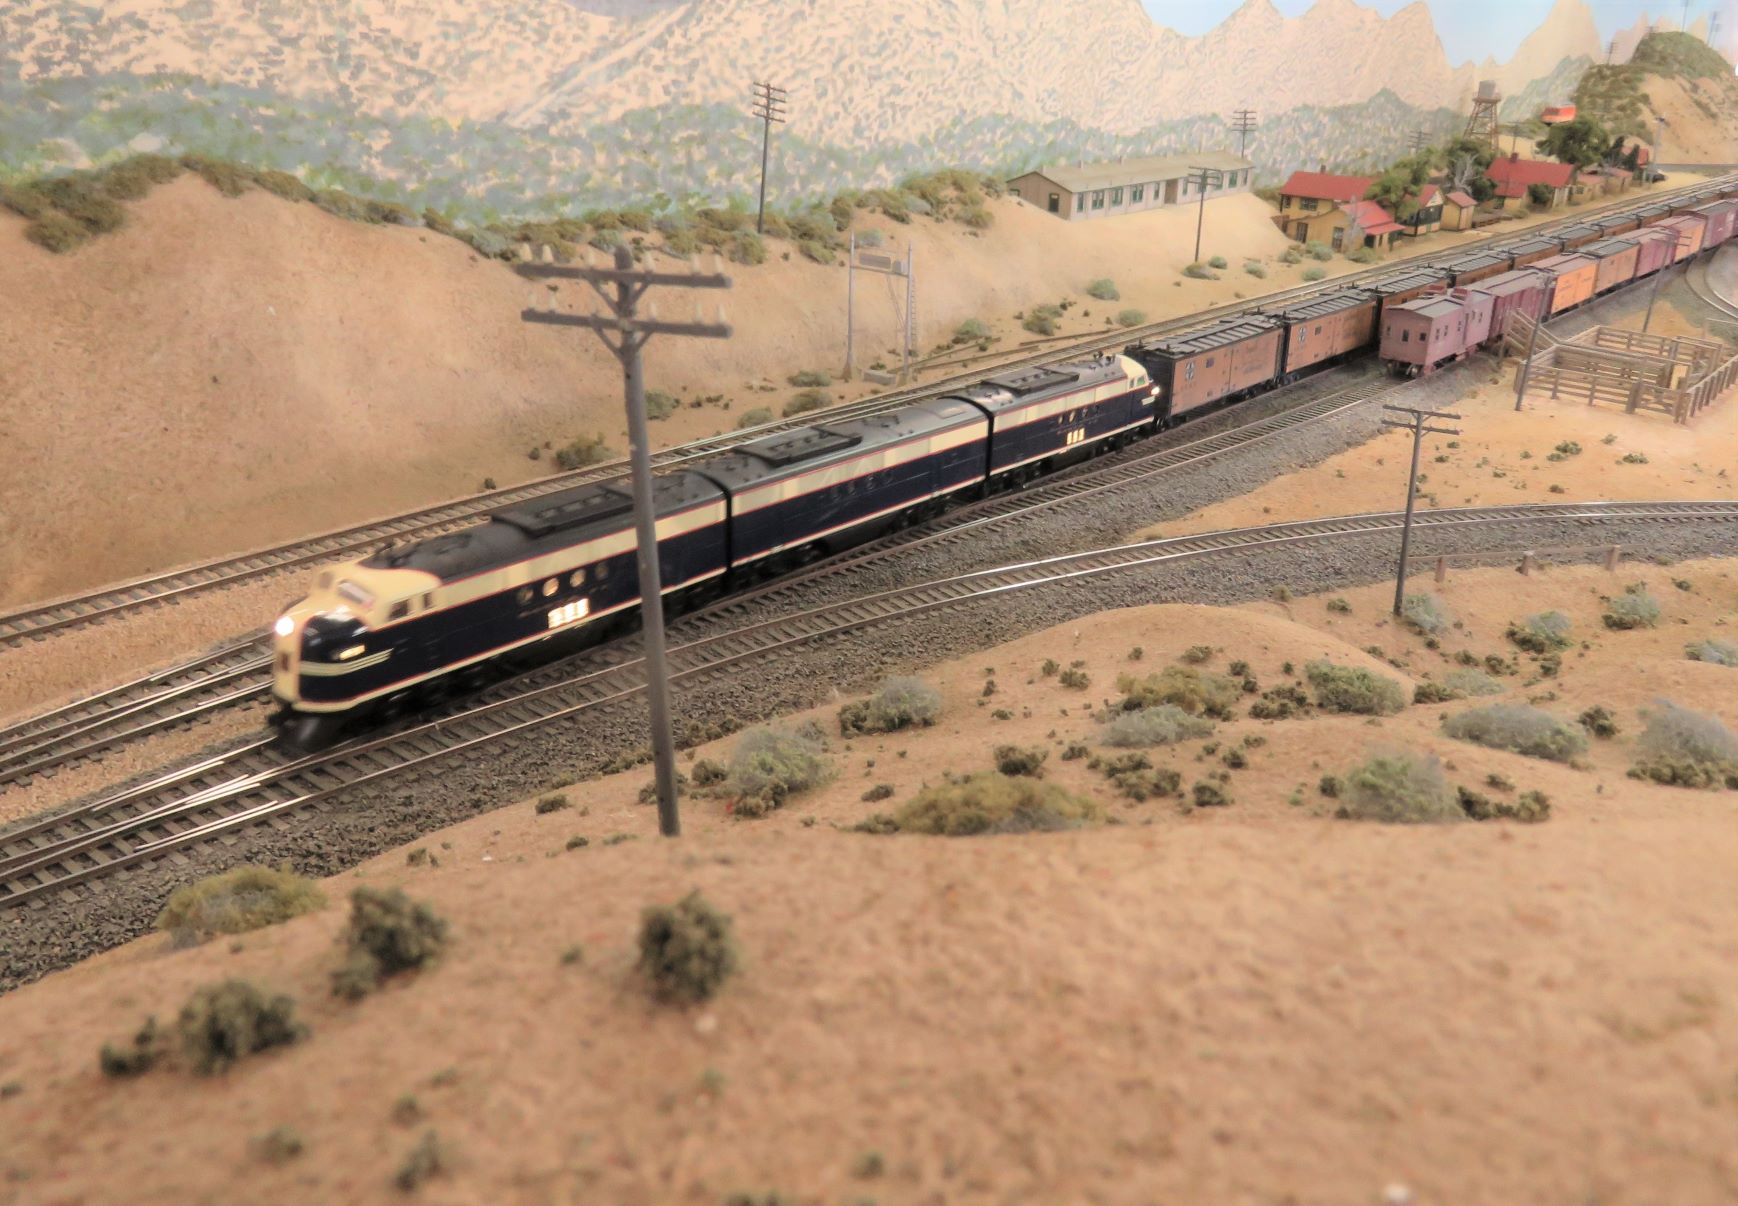 Santa Fe freight with FT_s Passing Summit on Cajon Pass. – Rob McLear|Photo Gallery